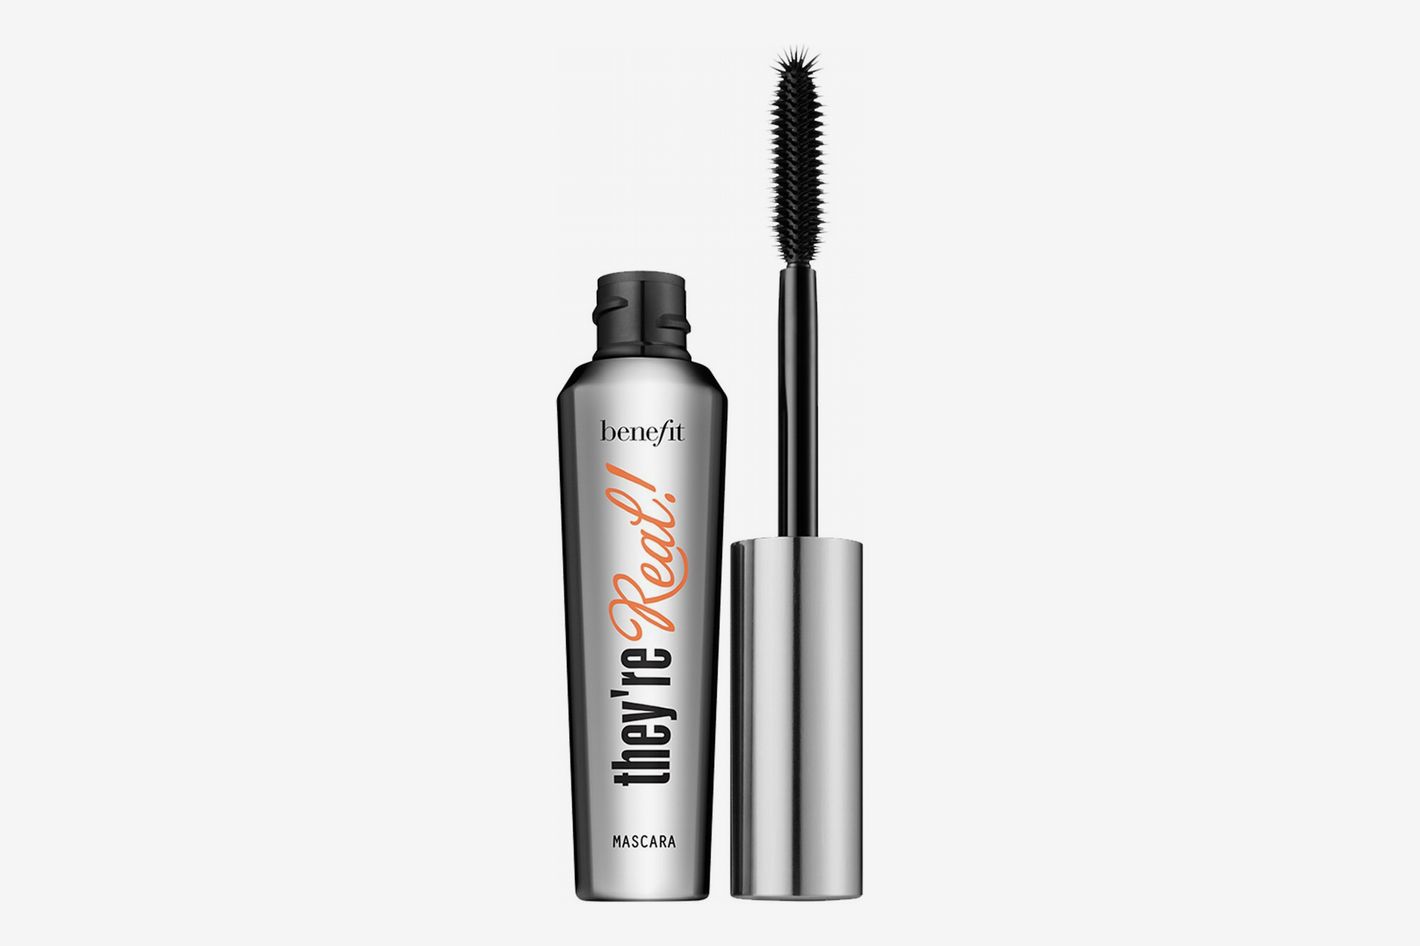 The Best Mascaras, According to Hyperenthusiastic Reviewers